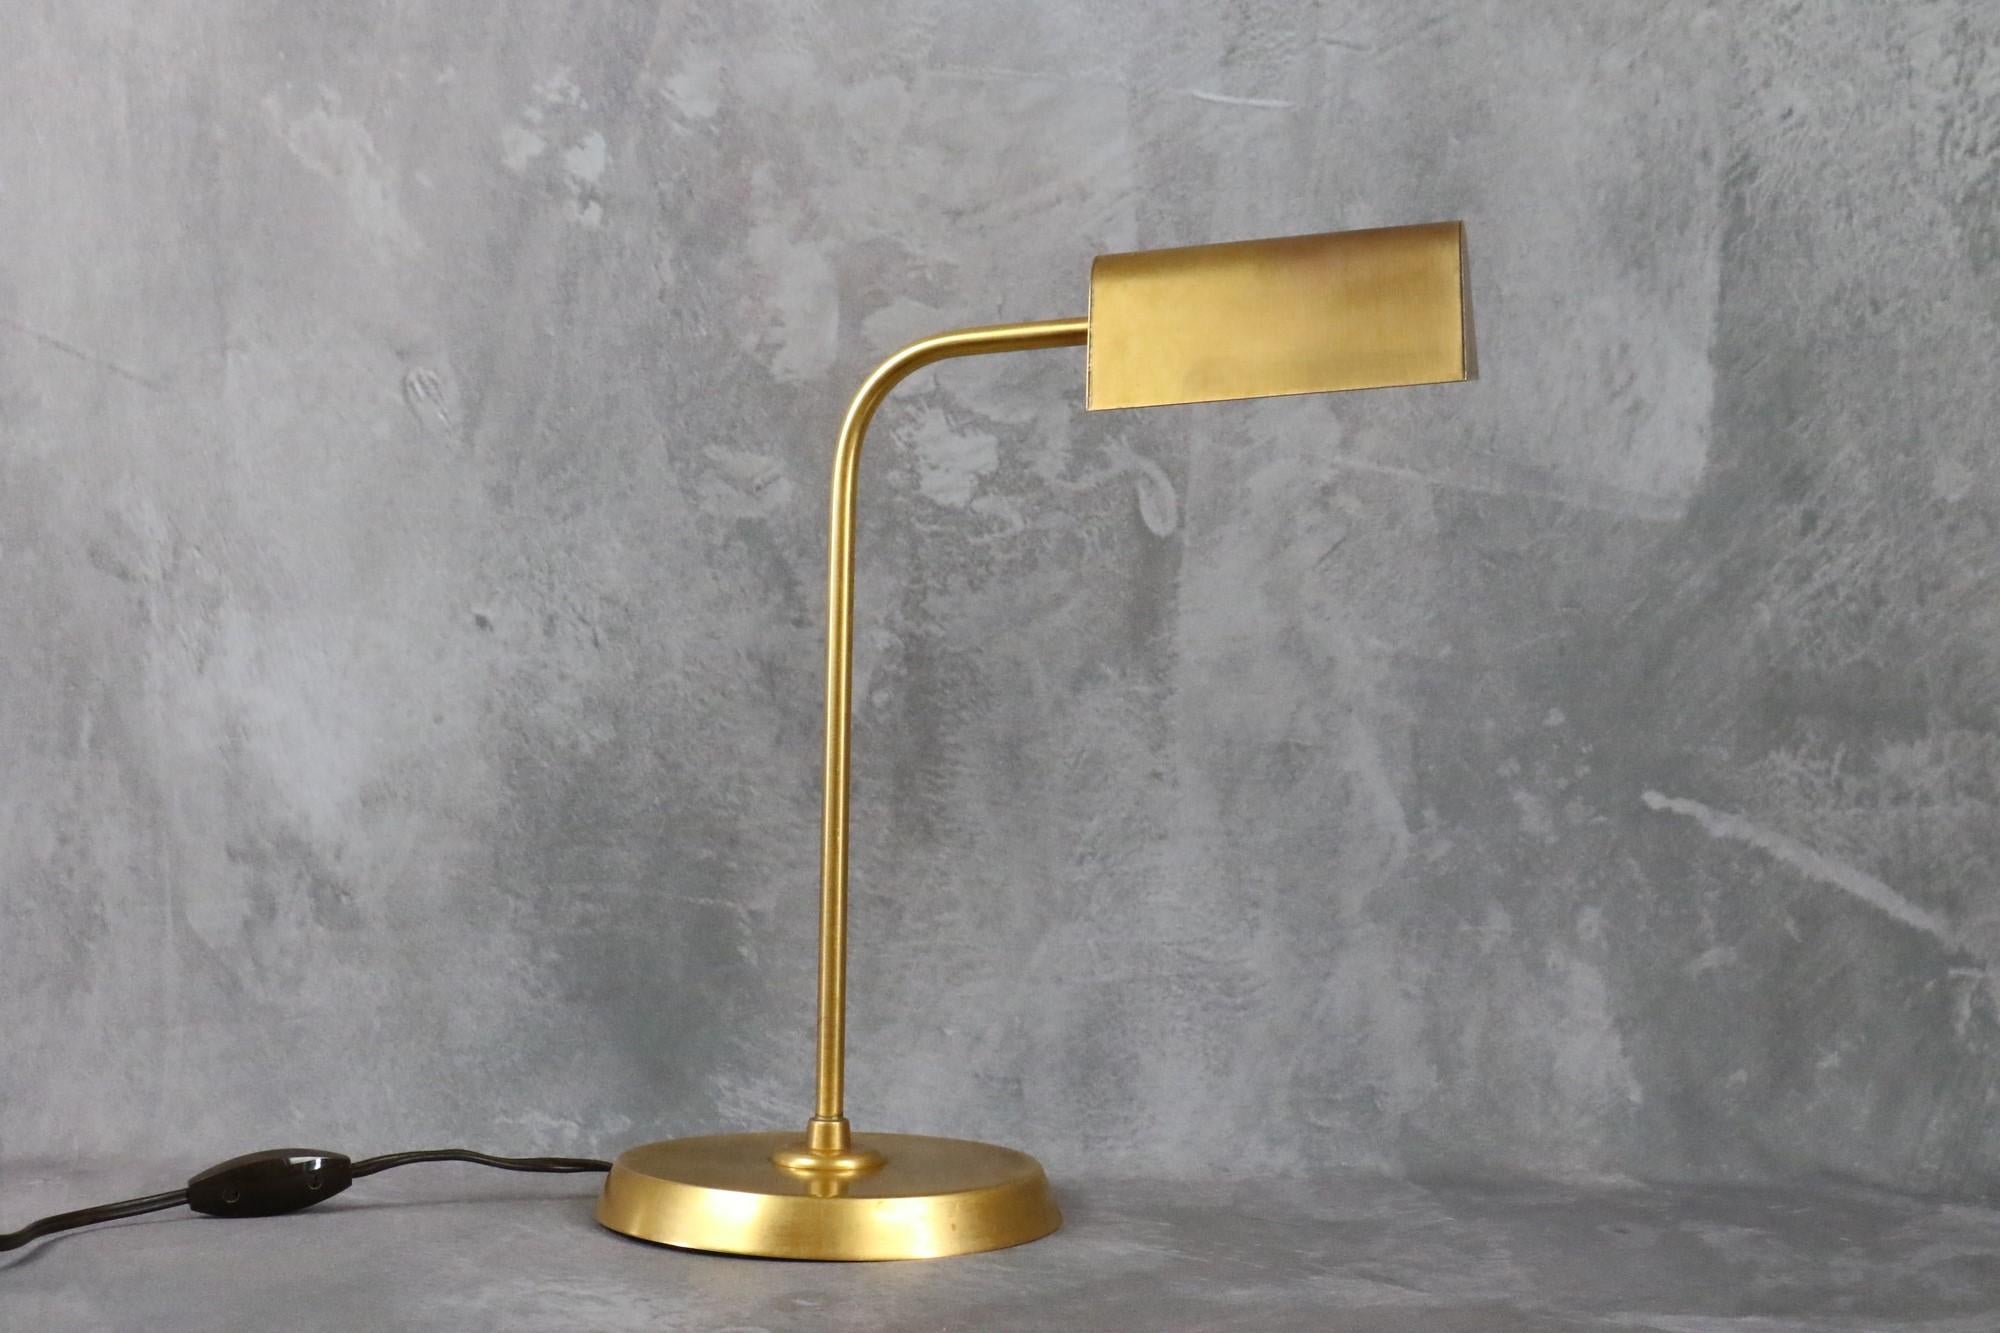 Brass desk lamp in the style of Hansen - 1950s - Table light era Biny, Guariche

Beautifully executed in brass and metal. This french light offers an elegant and simple, design and high-quality construction.

In good condition regarding the age